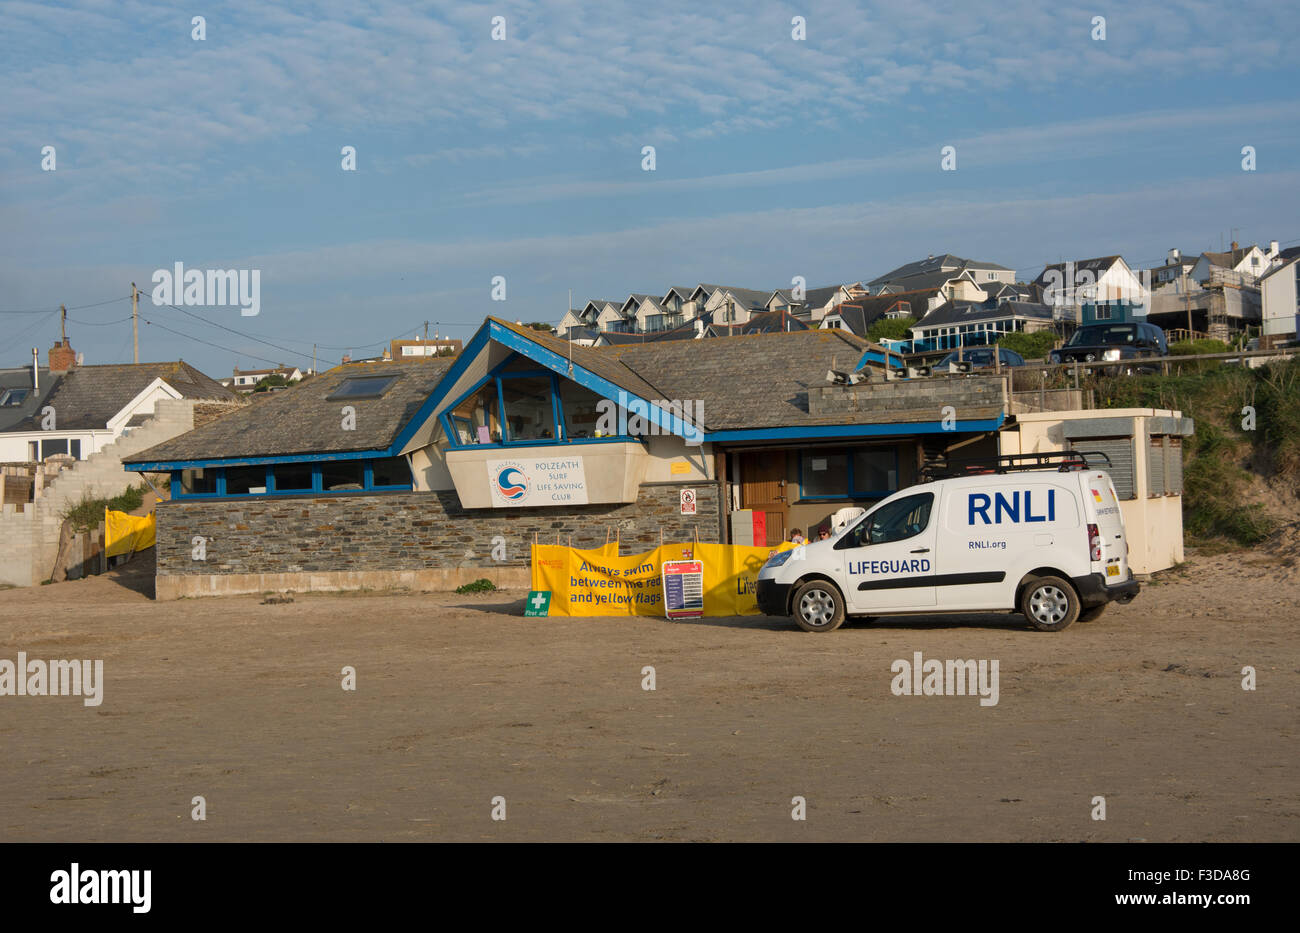 A RNLI Lifeguards van is parked outside the Polzeath Surf Life Savers club building at the end of  a sunny day Stock Photo